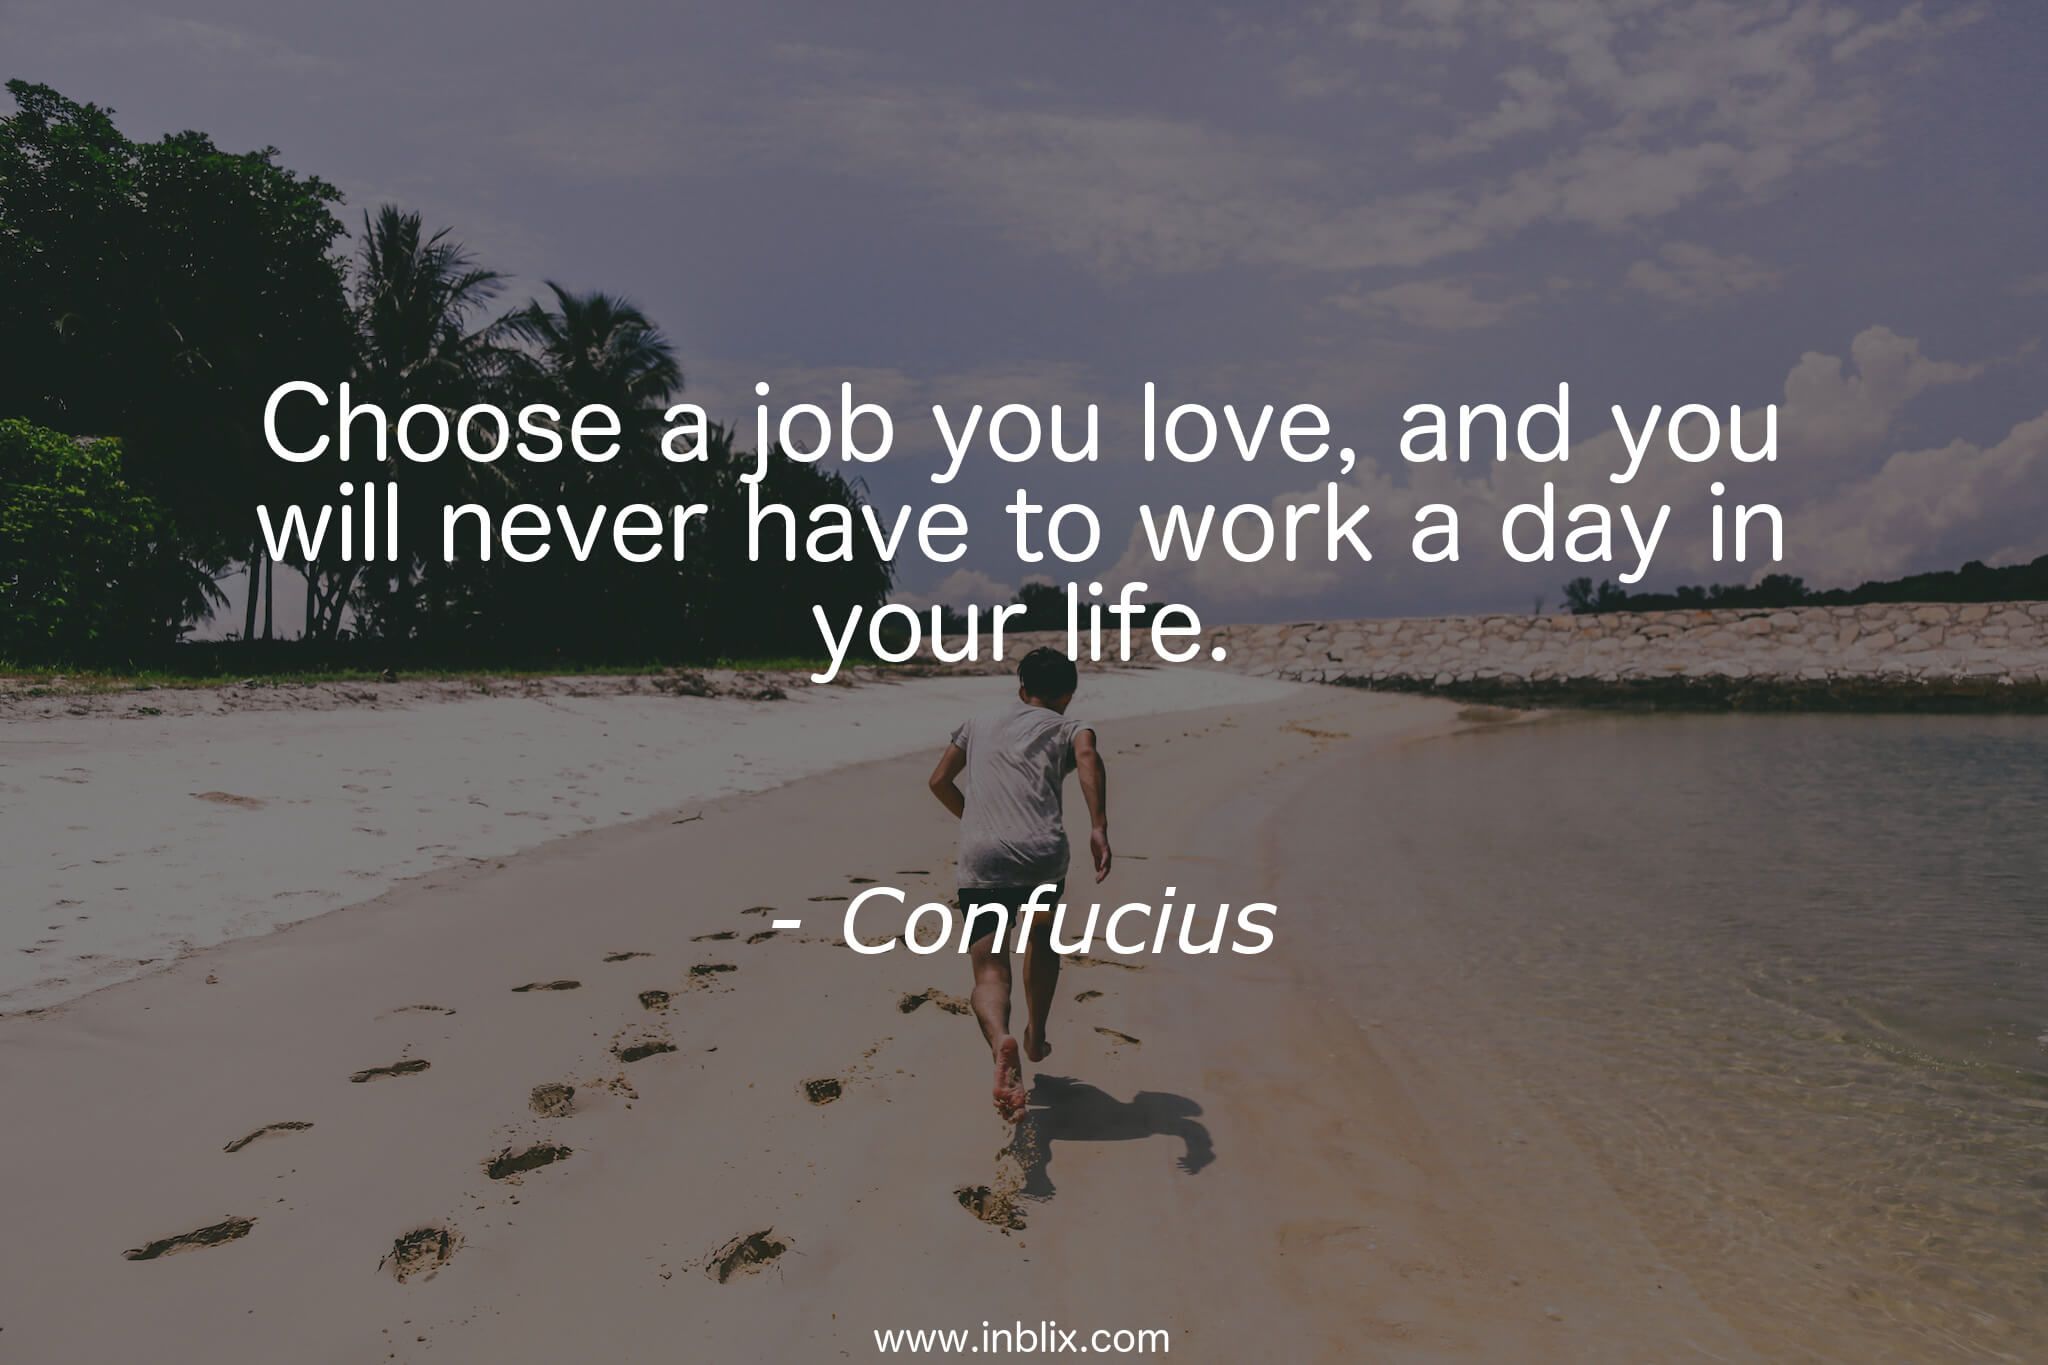 Life love work. Choose a job you Love, and you will never have to work a Day in your Life. Choose a job you Love. Day in your Life. You will never.